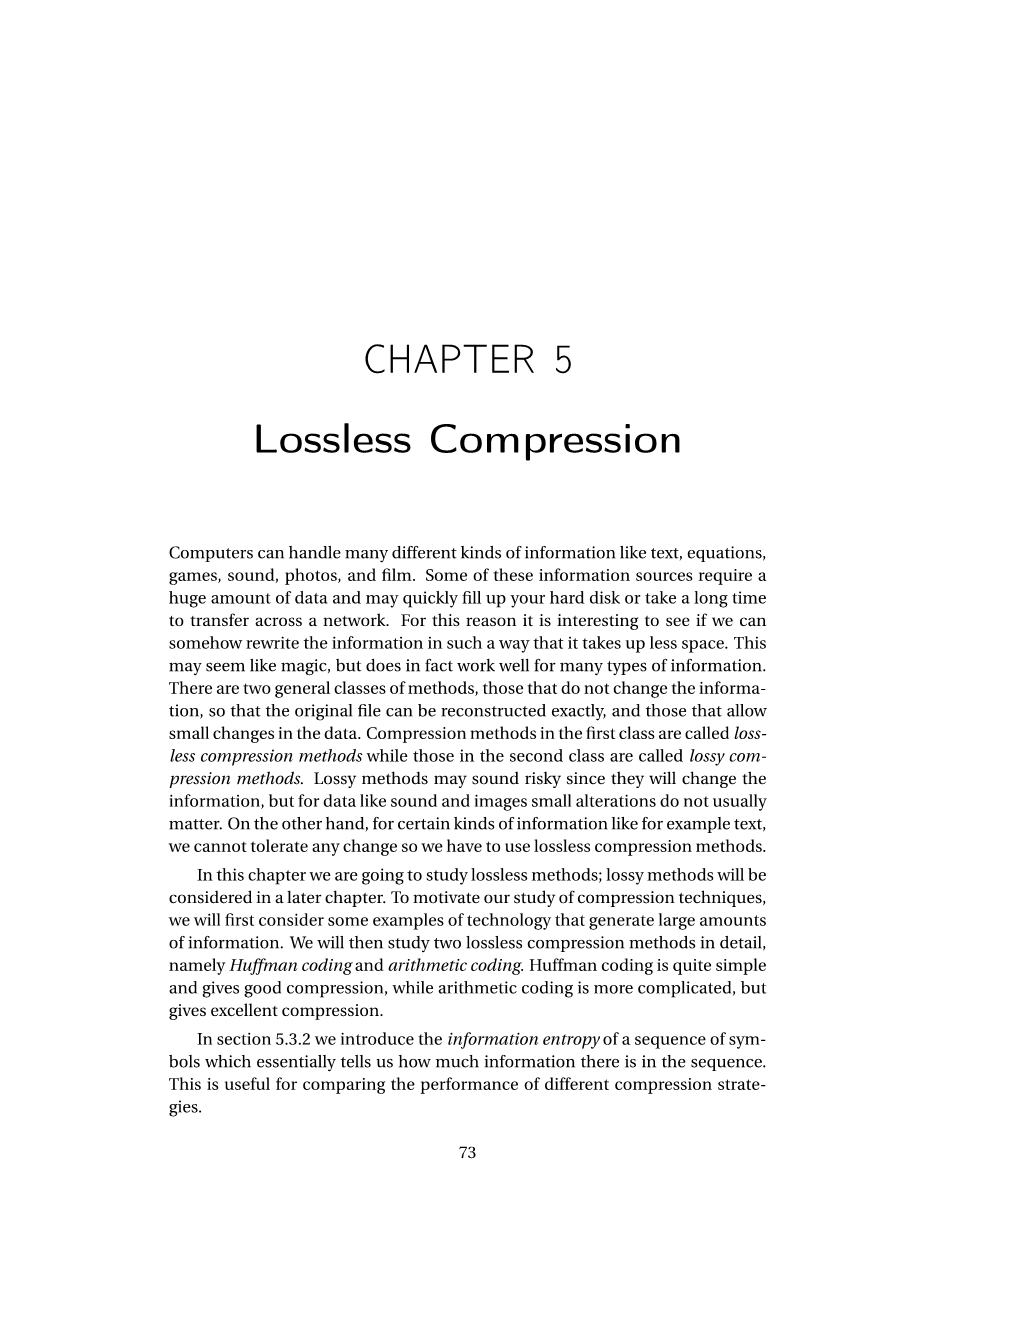 CHAPTER 5 Lossless Compression